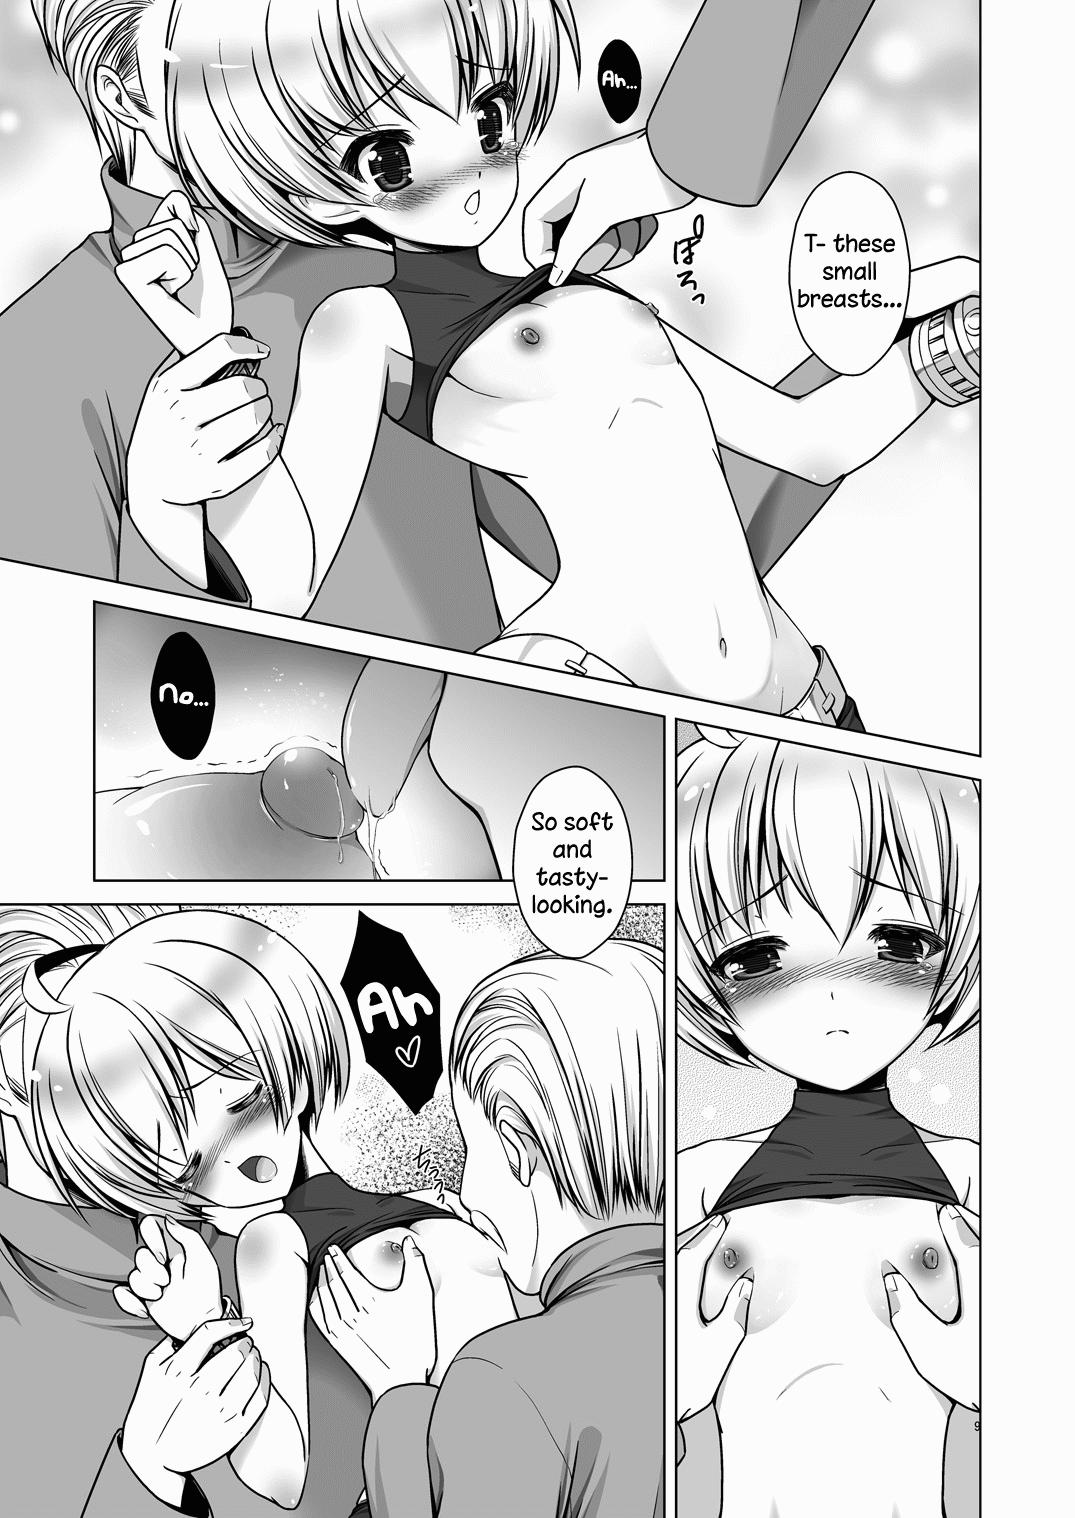 Mamando Teisoutai | Chastity Belt - Final fantasy tactics Gay Trimmed - Page 10